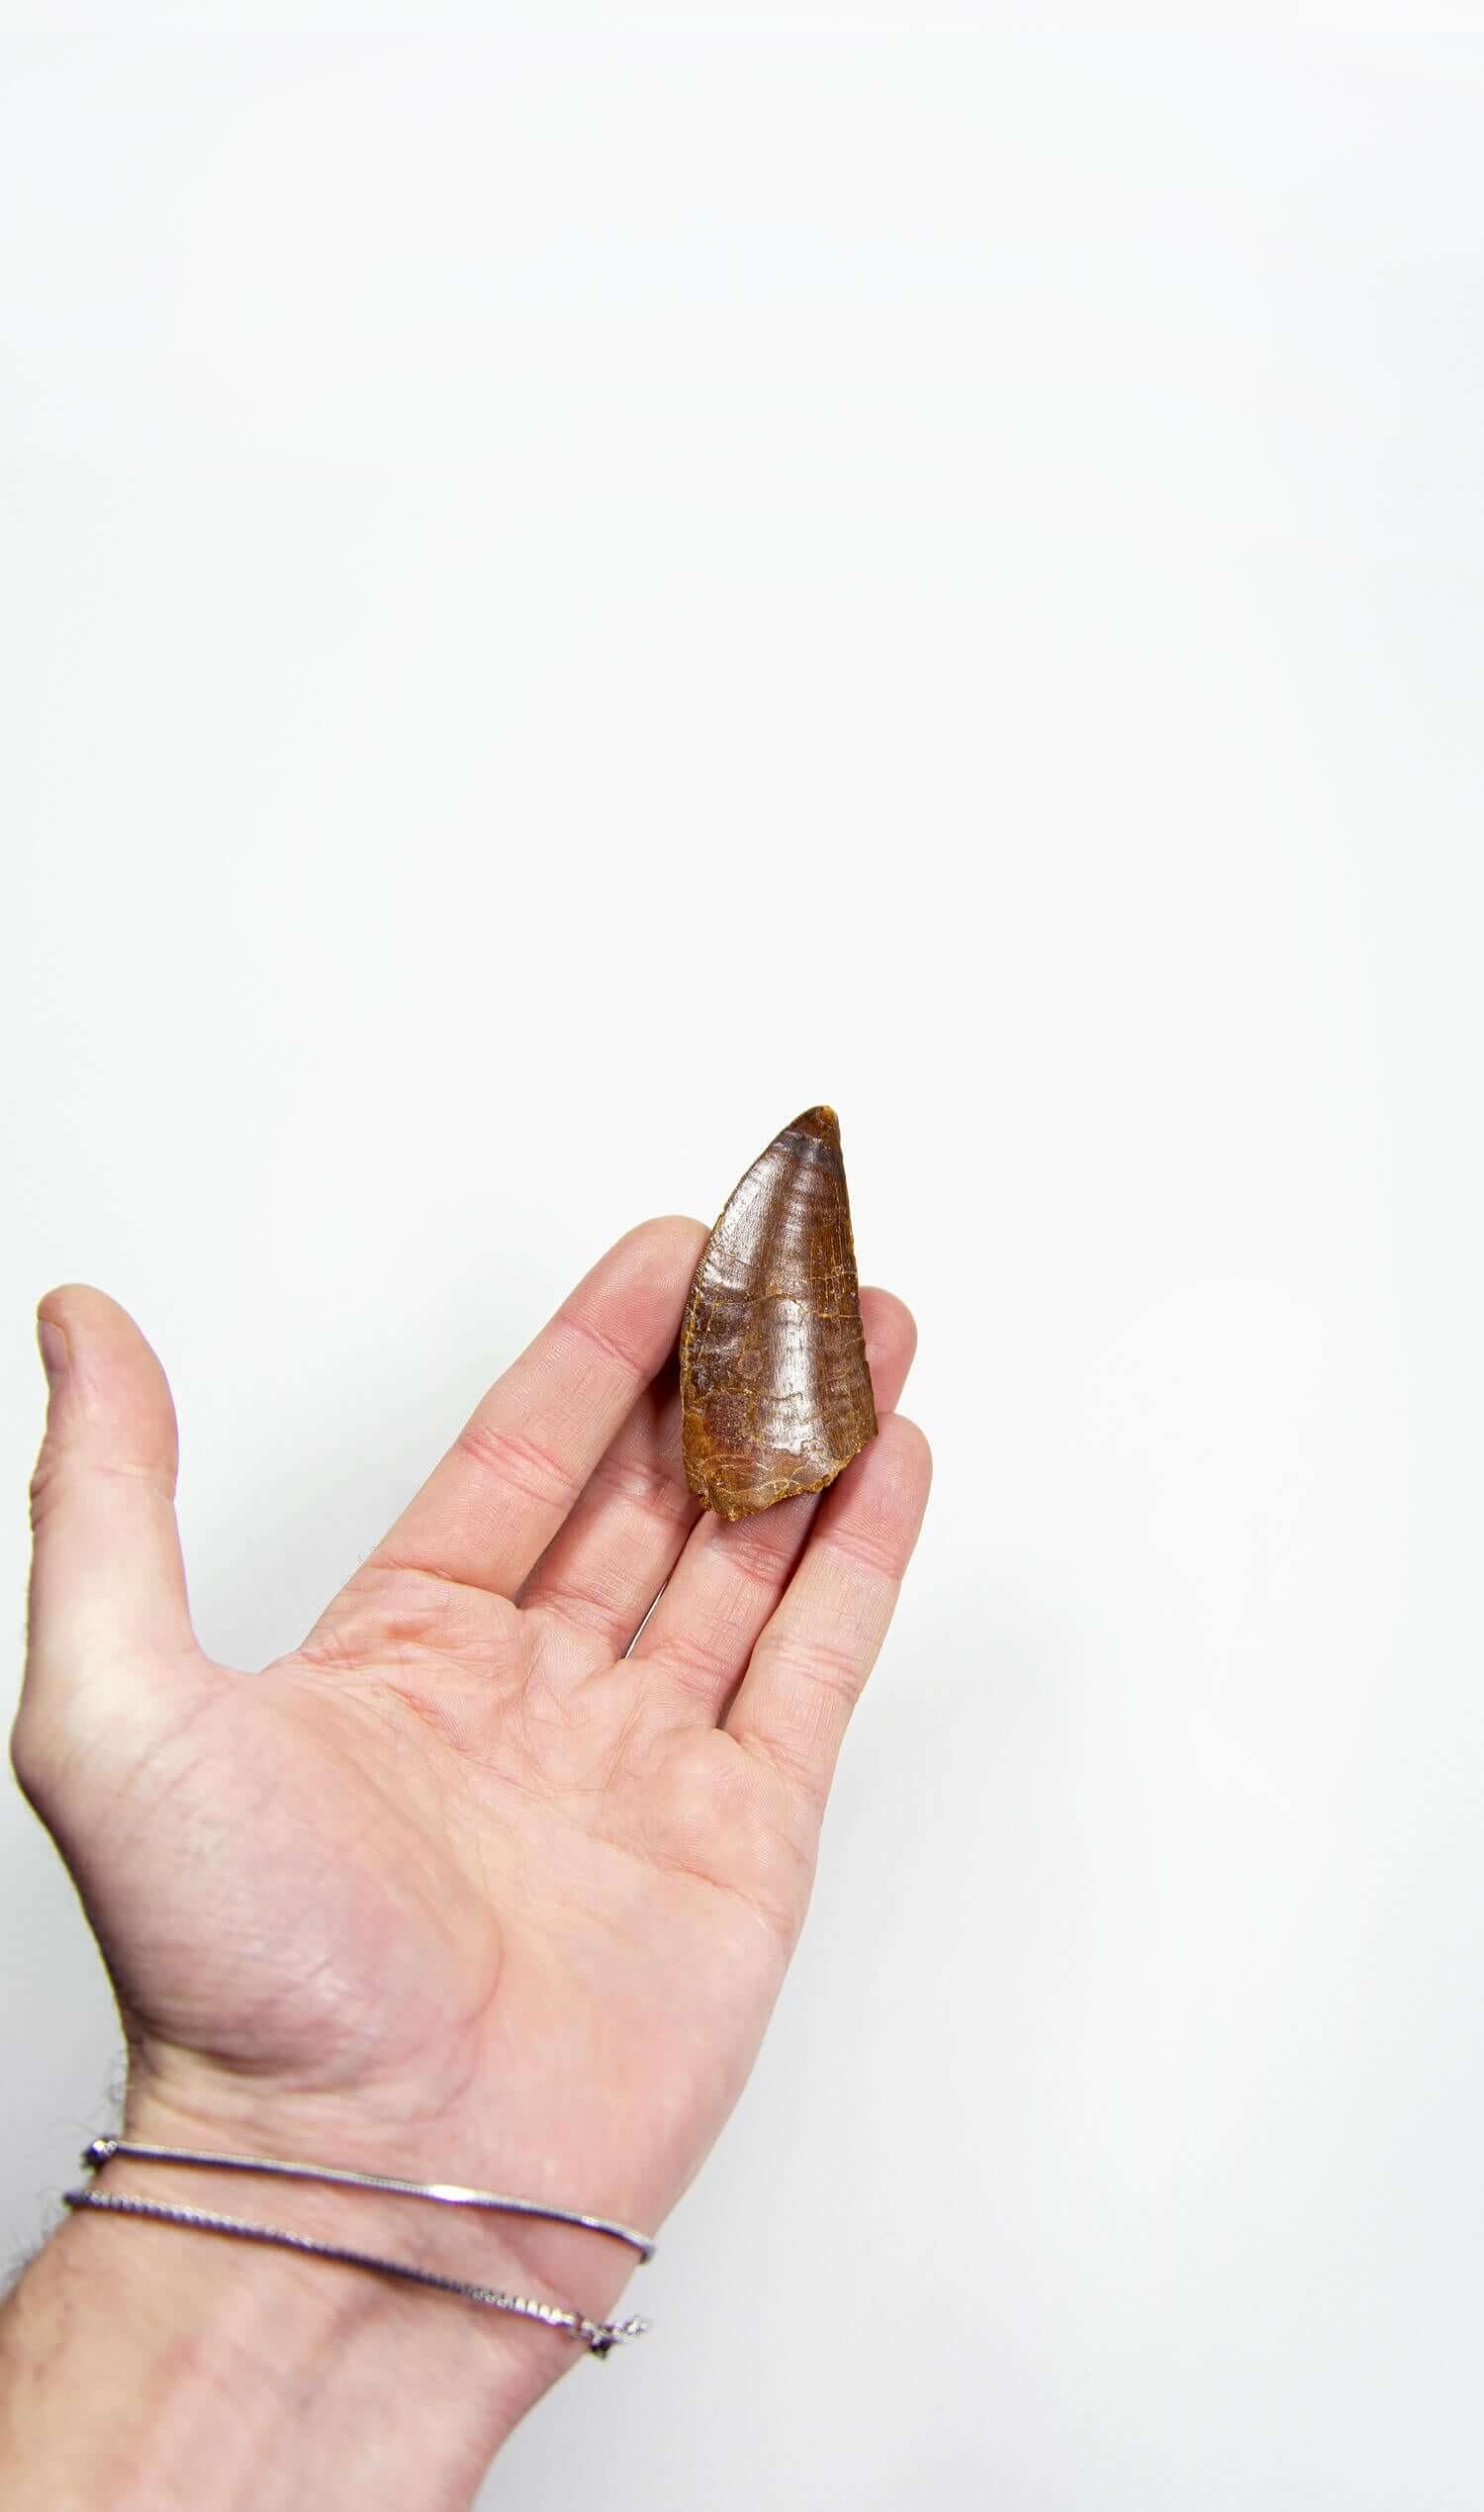 real fossil dinosaur carcharodontosaurus tooth for sale at the uk fossil store 43